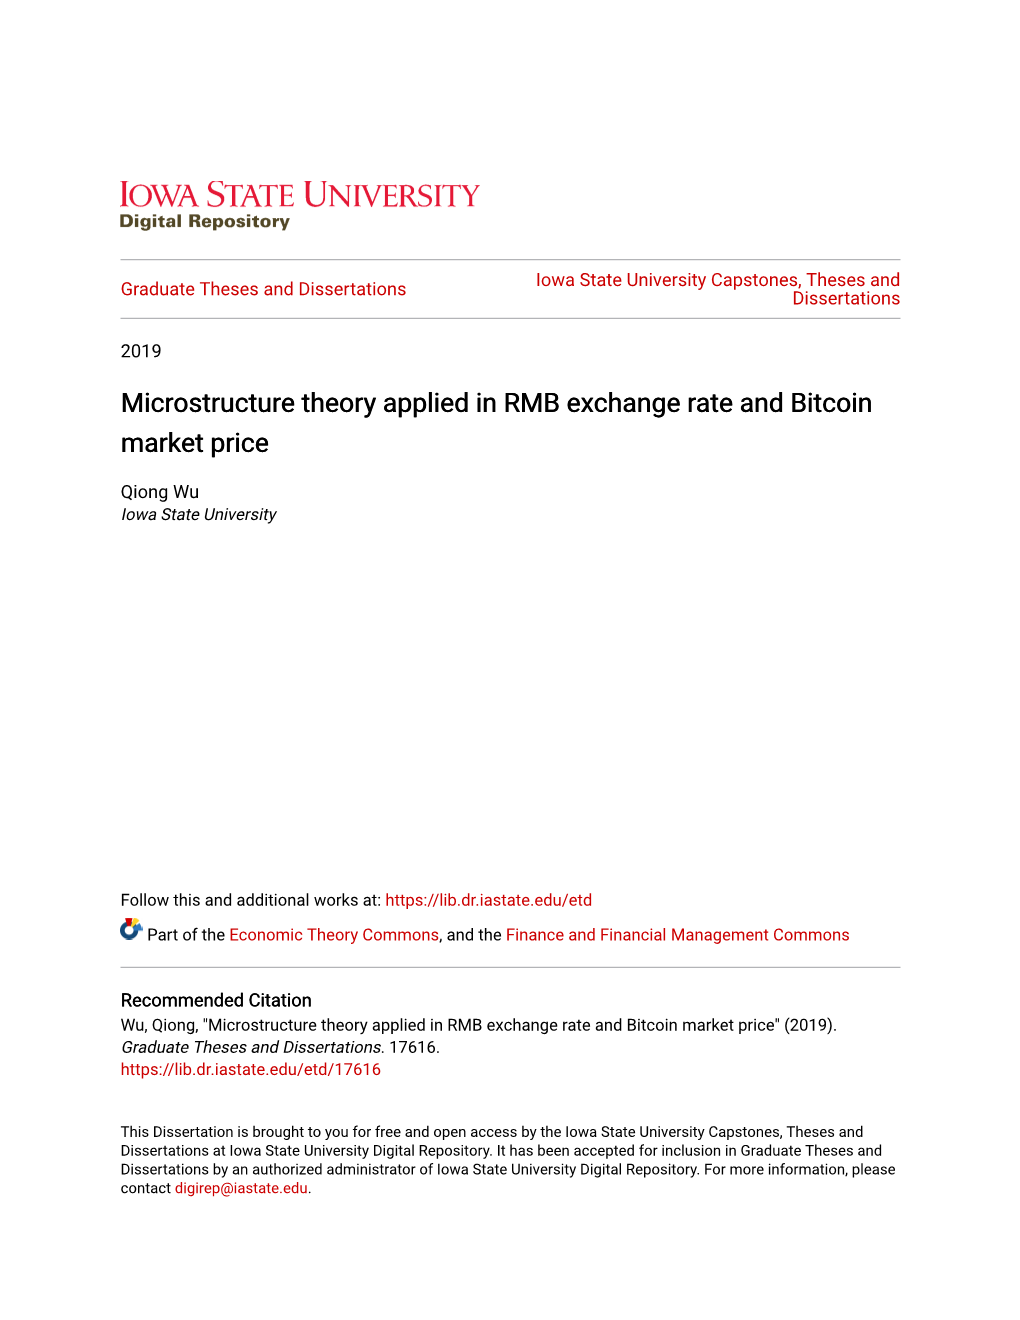 Microstructure Theory Applied in RMB Exchange Rate and Bitcoin Market Price